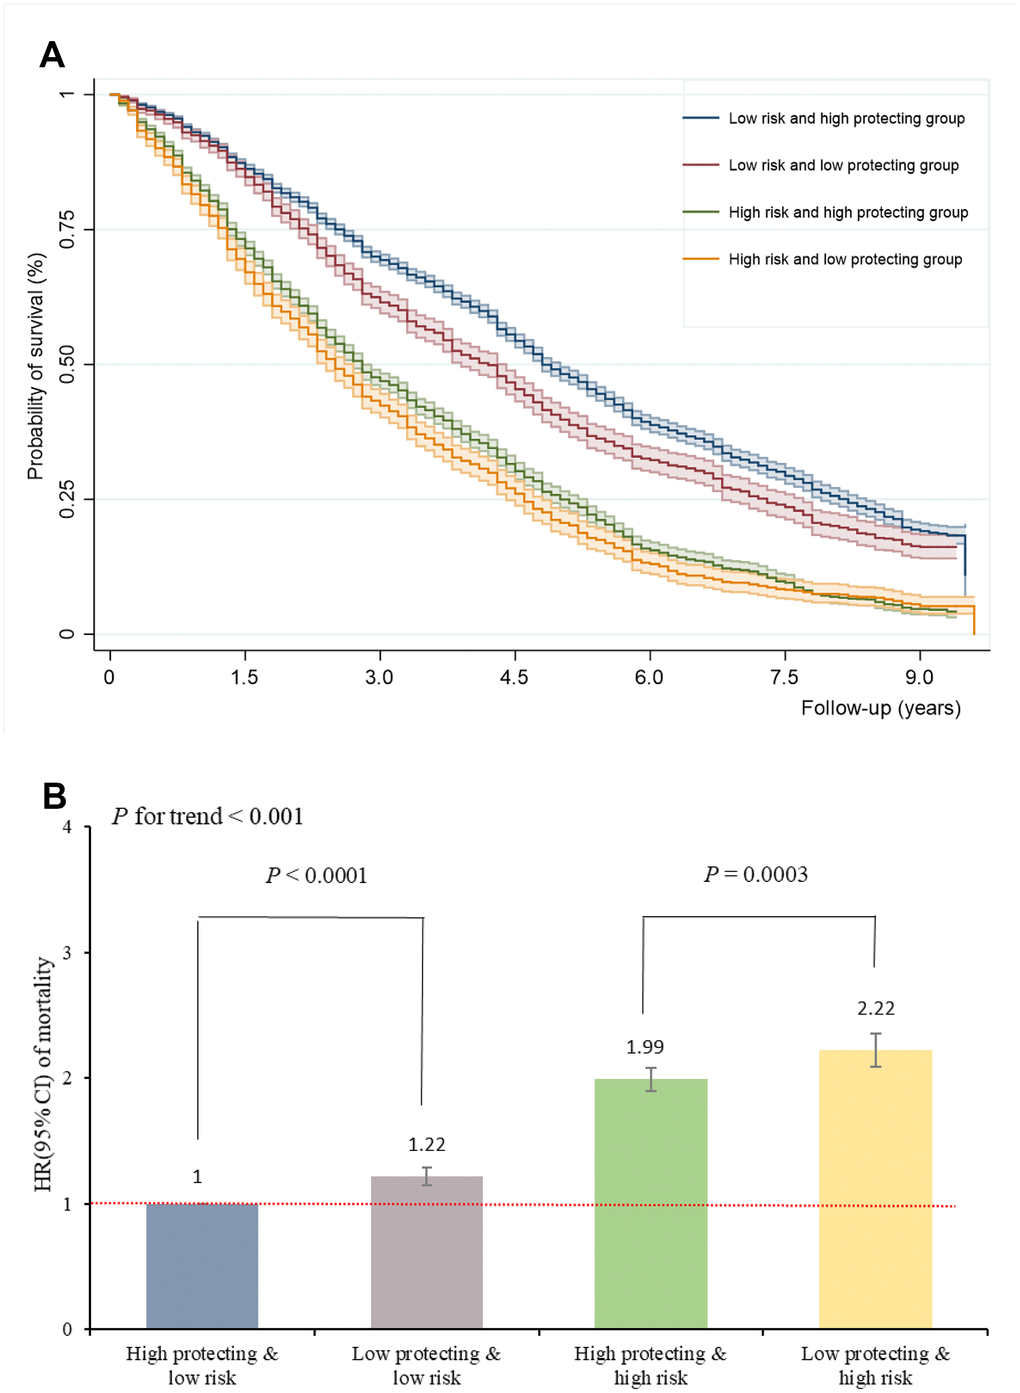 Adherence to healthy lifestyle can counteract the harmful effect of risk factors on mortality and prolong survival in oldest-old. (A) The Kaplan-Meier survival curves of combined risk and protecting factors; (B) The HRs of combined risk and protecting factors for mortality.